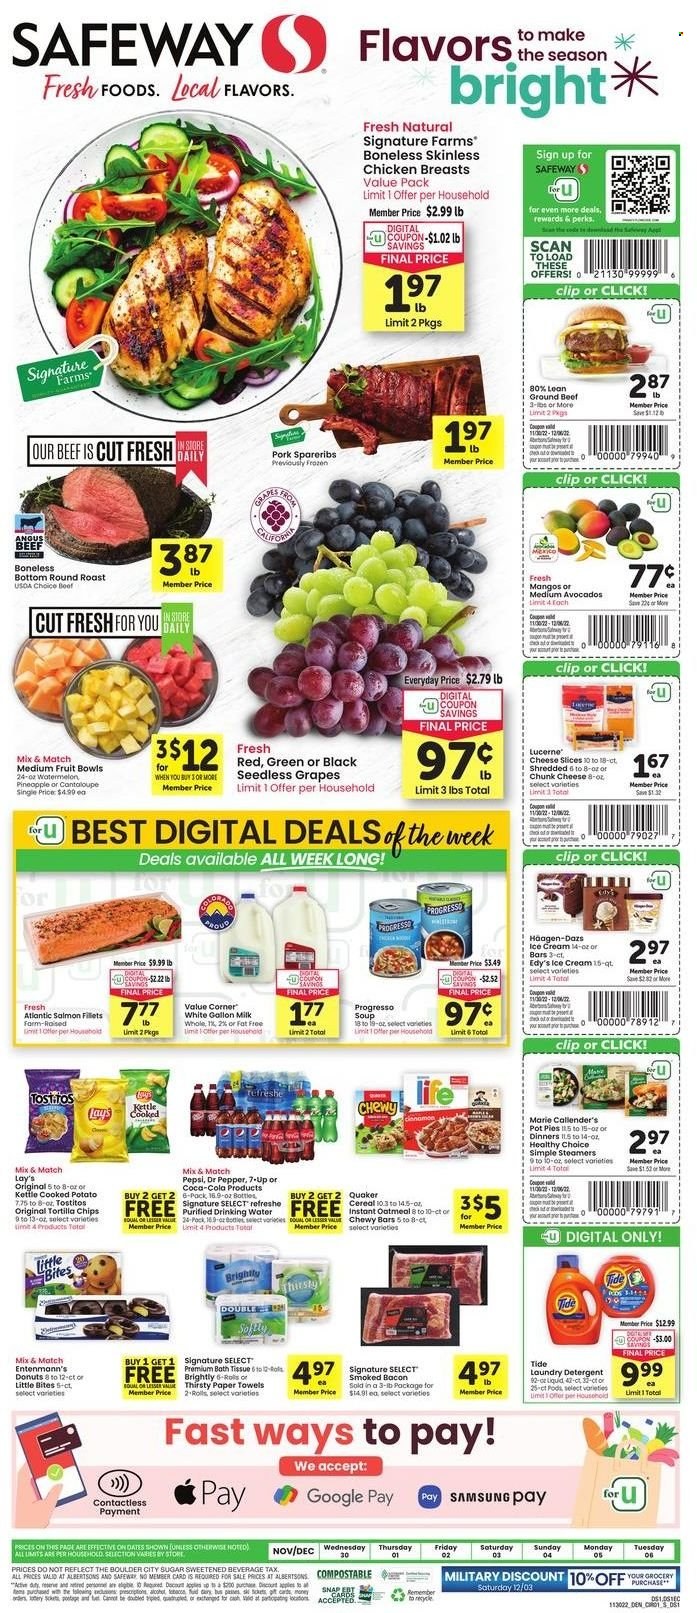 thumbnail - Safeway Flyer - 11/30/2022 - 12/06/2022 - Sales products - pot pie, donut, Entenmann's, apples, avocado, grapes, mango, seedless grapes, watermelon, chicken breasts, beef meat, ground beef, round roast, pork spare ribs, salmon, salmon fillet, Quaker, Progresso, Healthy Choice, Marie Callender's, bacon, sliced cheese, cheese, chunk cheese, milk, ice cream, Häagen-Dazs, Little Bites, tortilla chips, Lay’s, Tostitos, sugar, oatmeal, cereals, Coca-Cola, Pepsi, Dr. Pepper, 7UP, bath tissue, kitchen towels, paper towels, detergent, Tide, laundry detergent. Page 1.